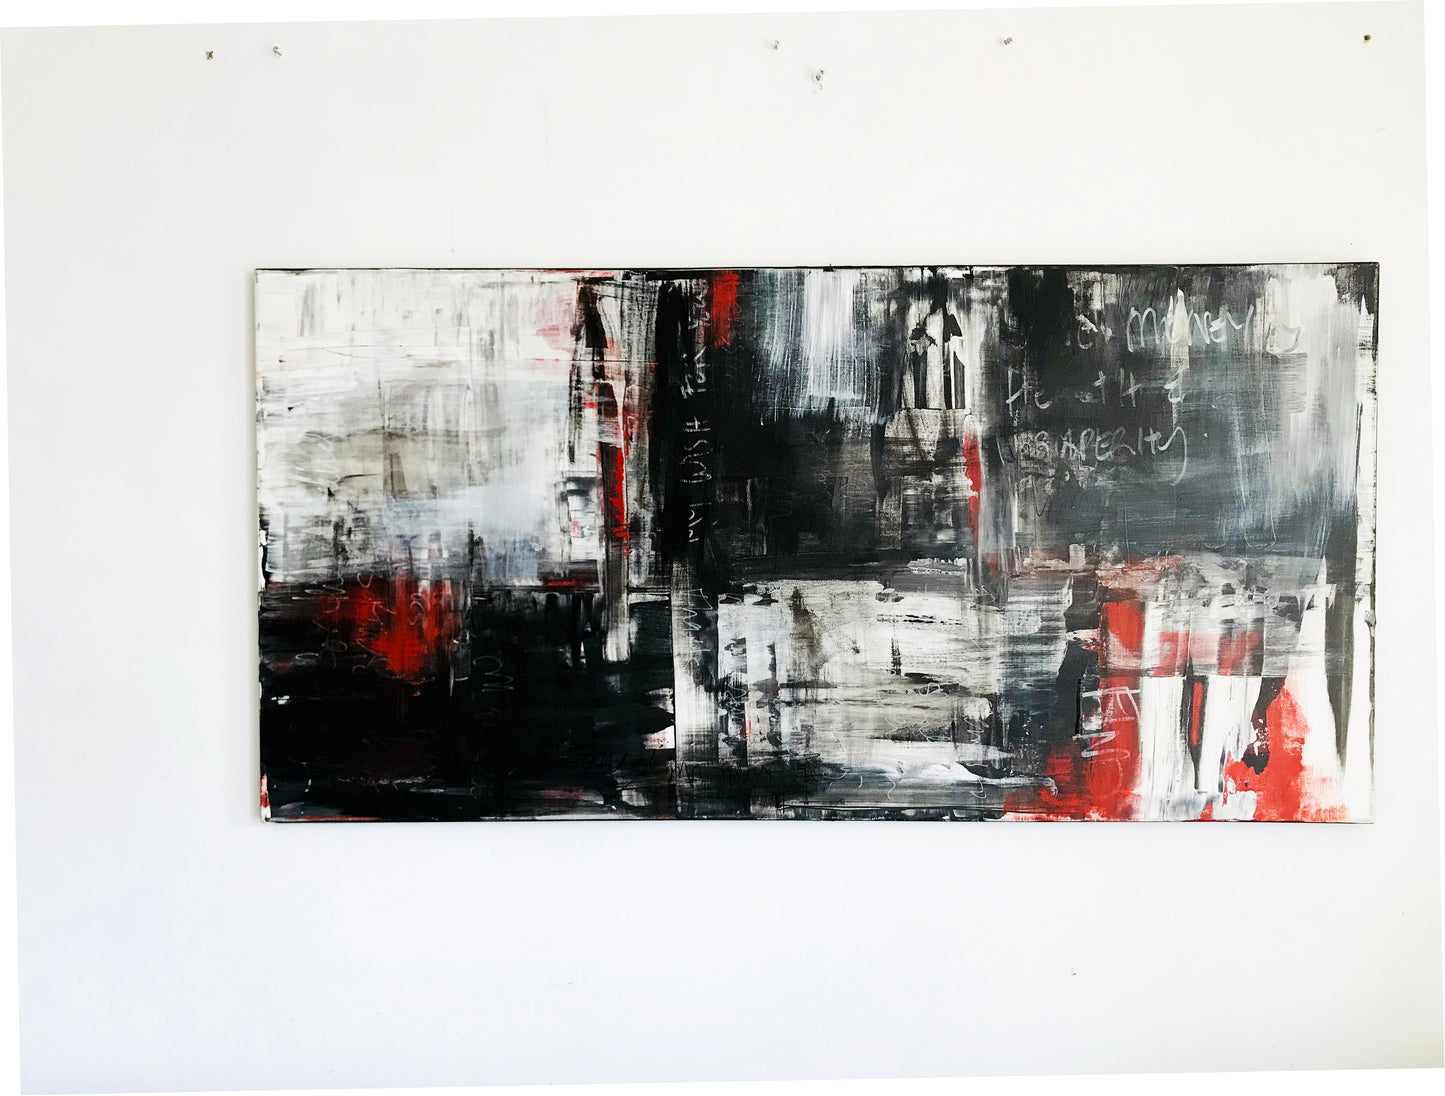 VIEW FROM THE PLANE XII (24" x 48" x 1") -SOLD